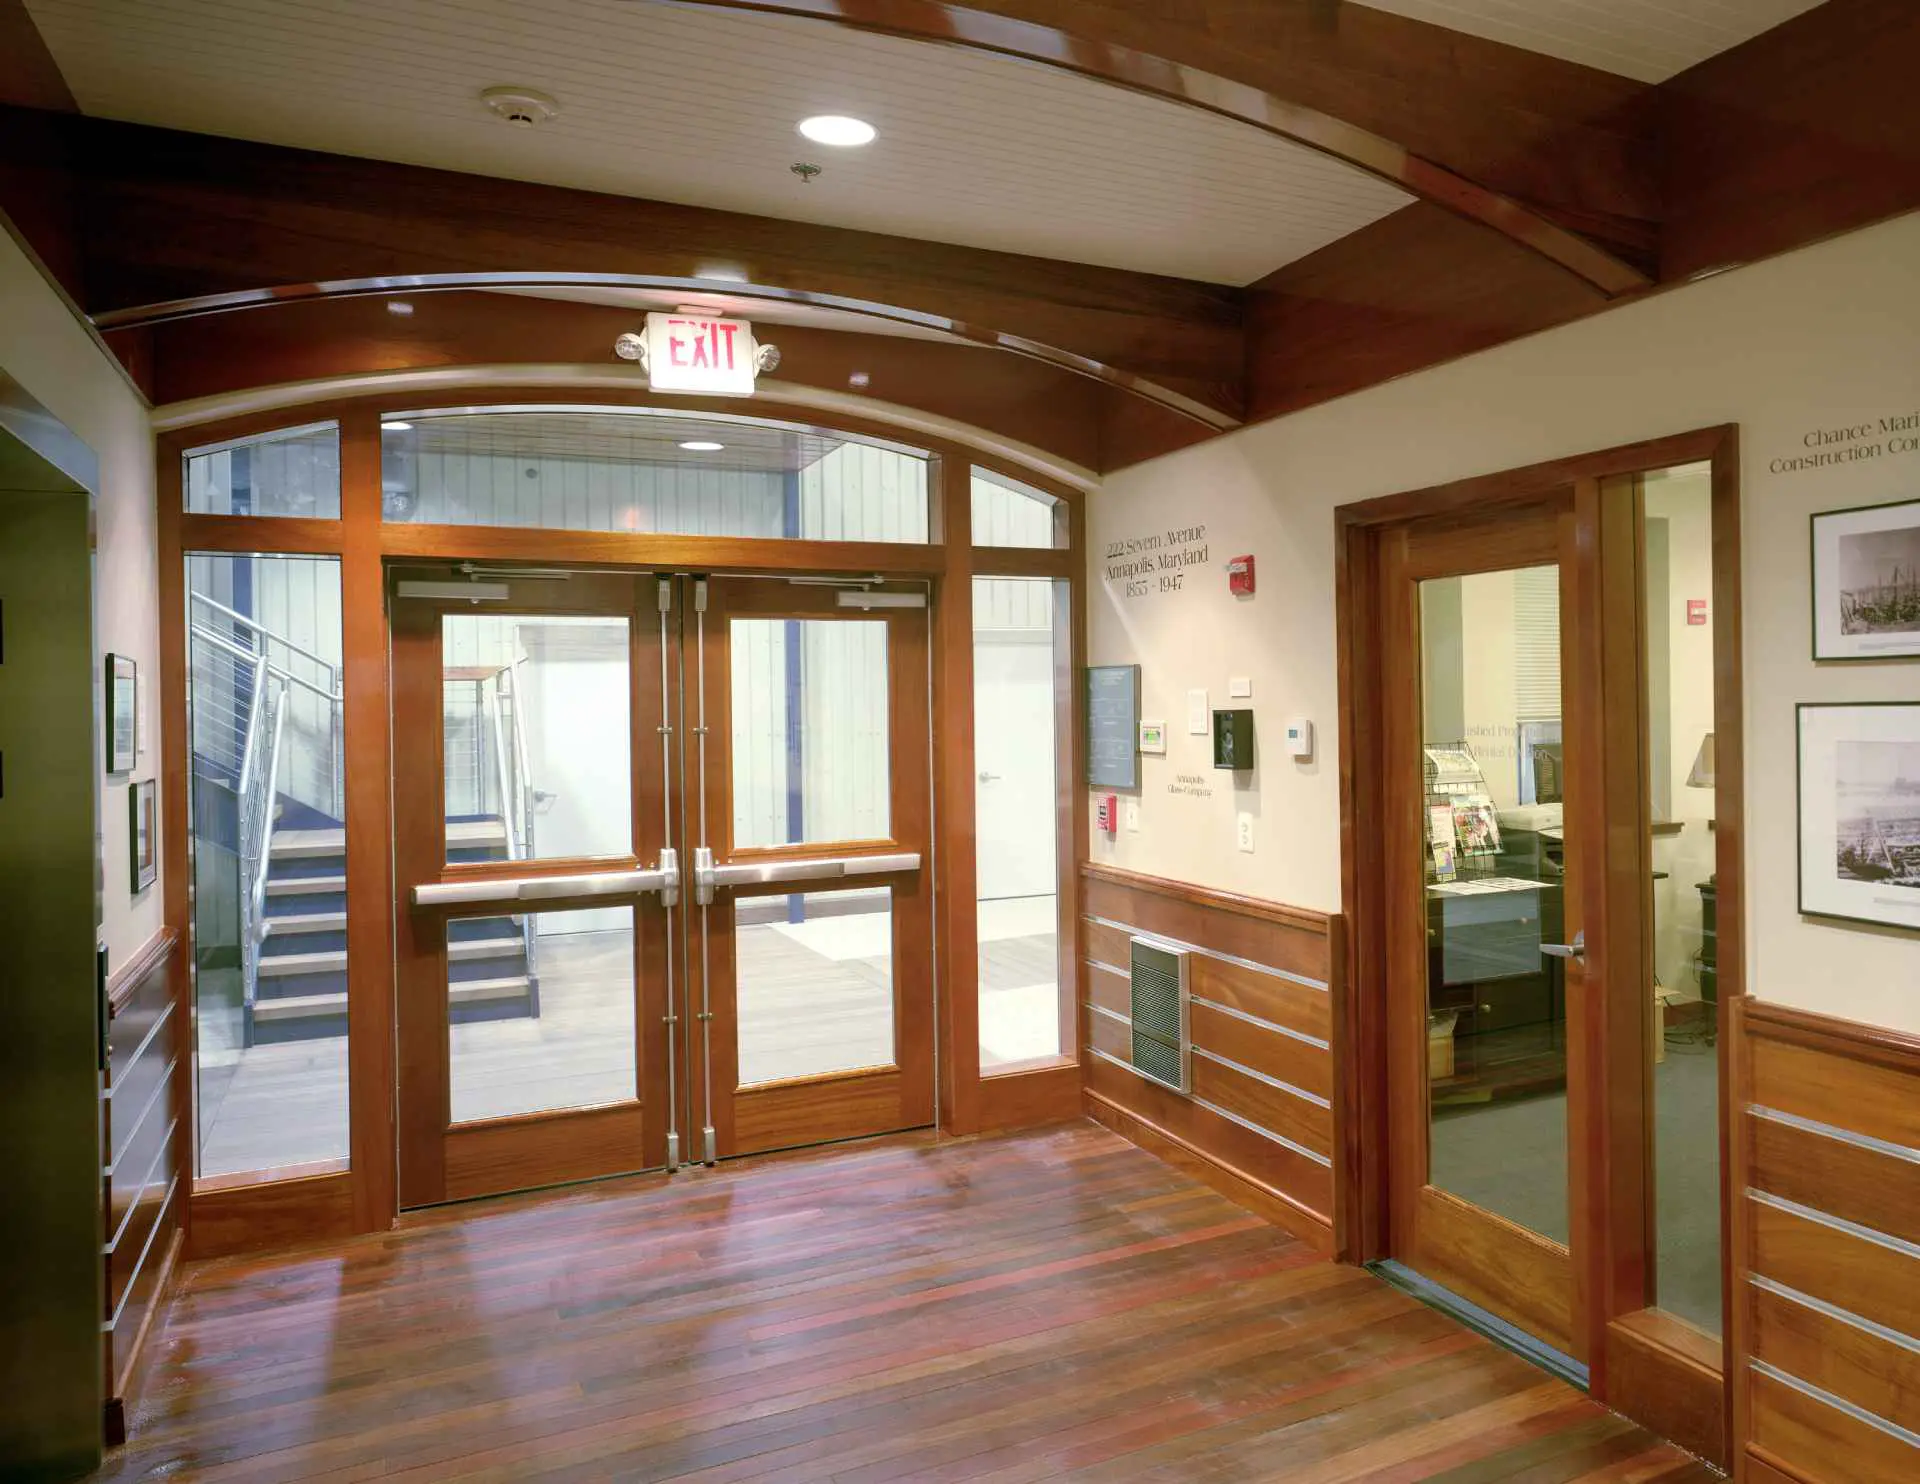 Beautiful 222 Severn Class A office lobby with mahogany interior and museum of Trumpy boat artifacts, located on the waterfront of Spa Creek in Annapolis Maryland.